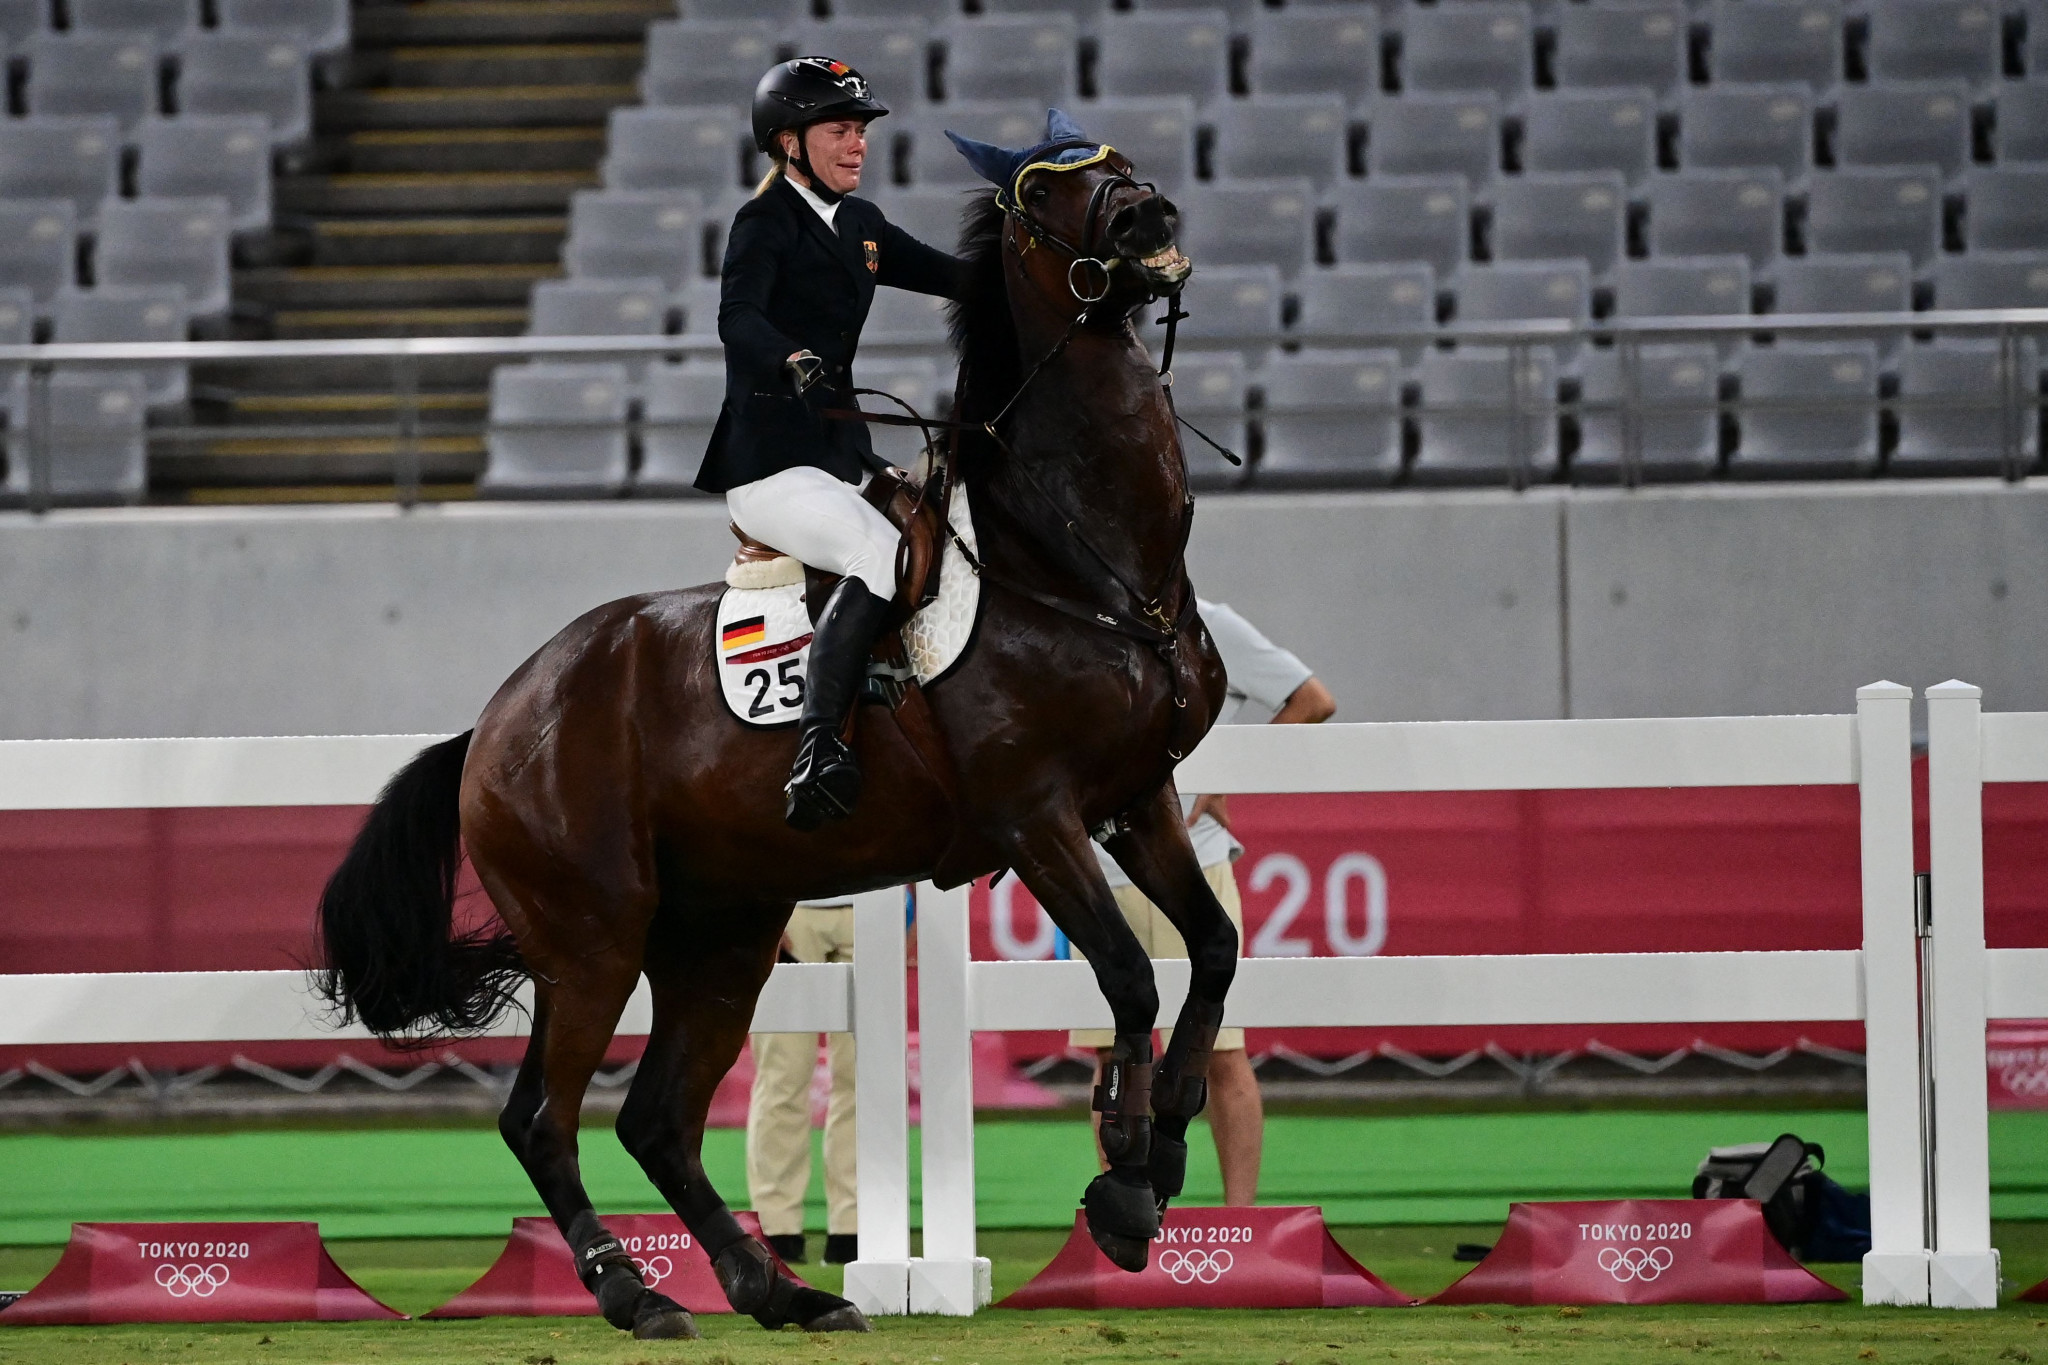 FEI President Ingmar De Vos said the scandal involving the horse Saint Boy at Tokyo 2020 was "completely unacceptable" ©Getty Images